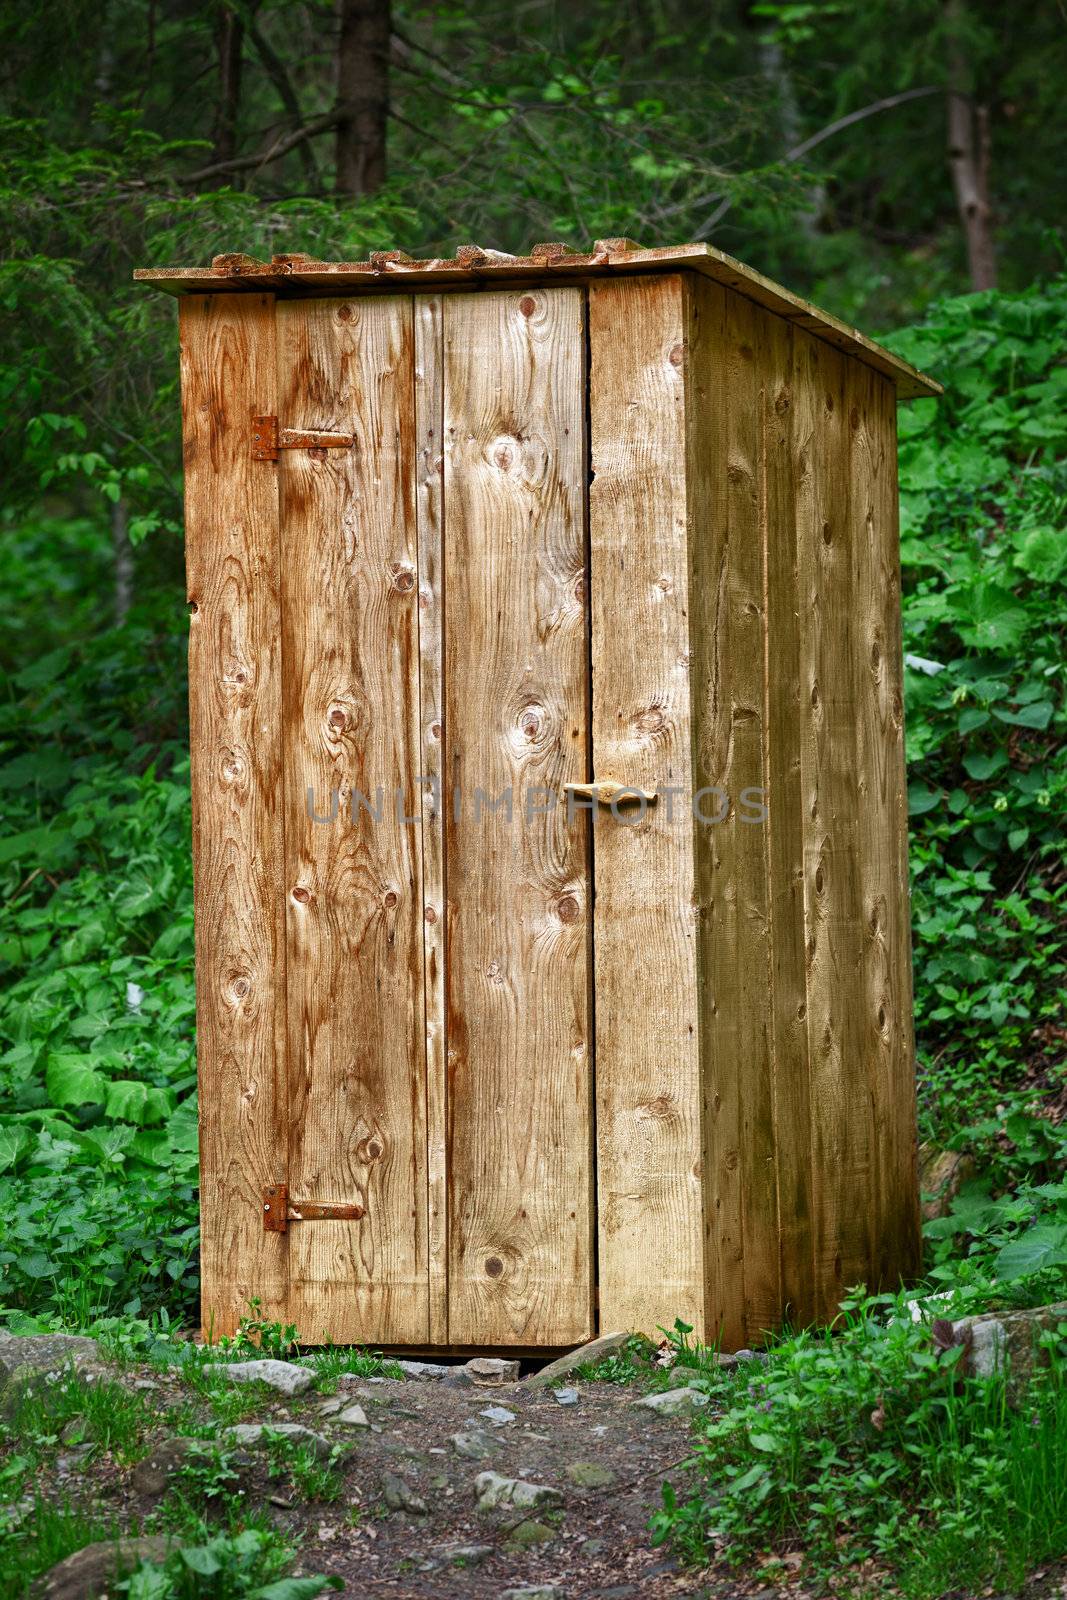 Rustic wooden toilet in the forest by pzaxe